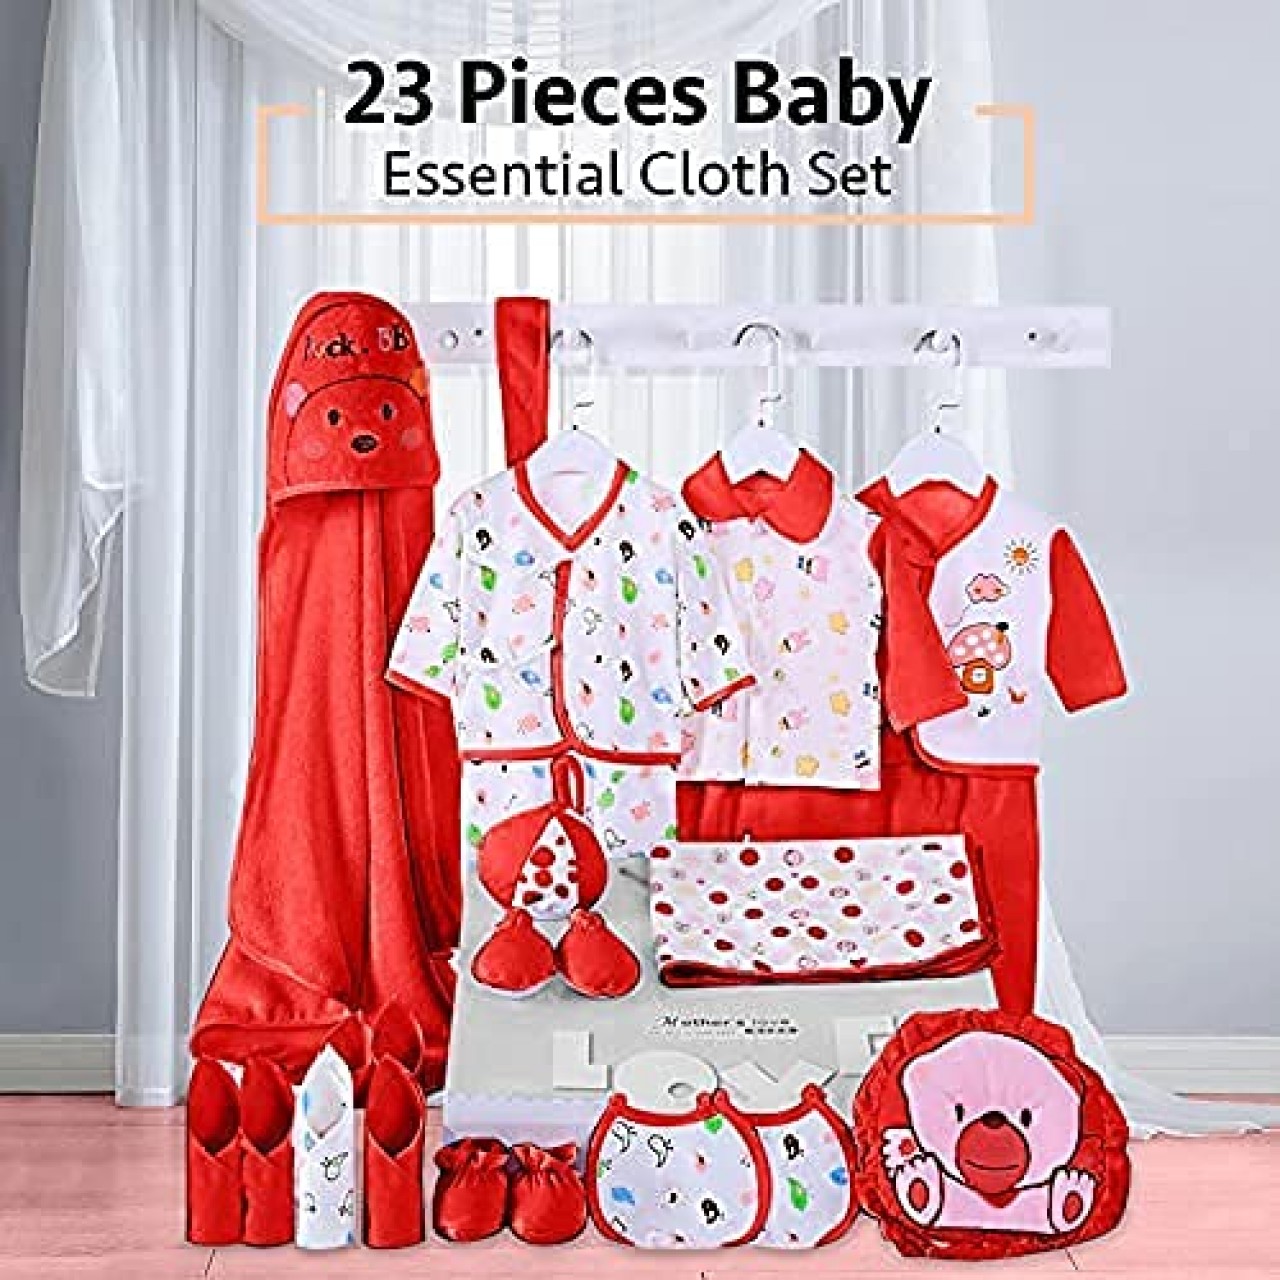 Organic Cotton Baby Cloth Set-Red (Pack of 23)